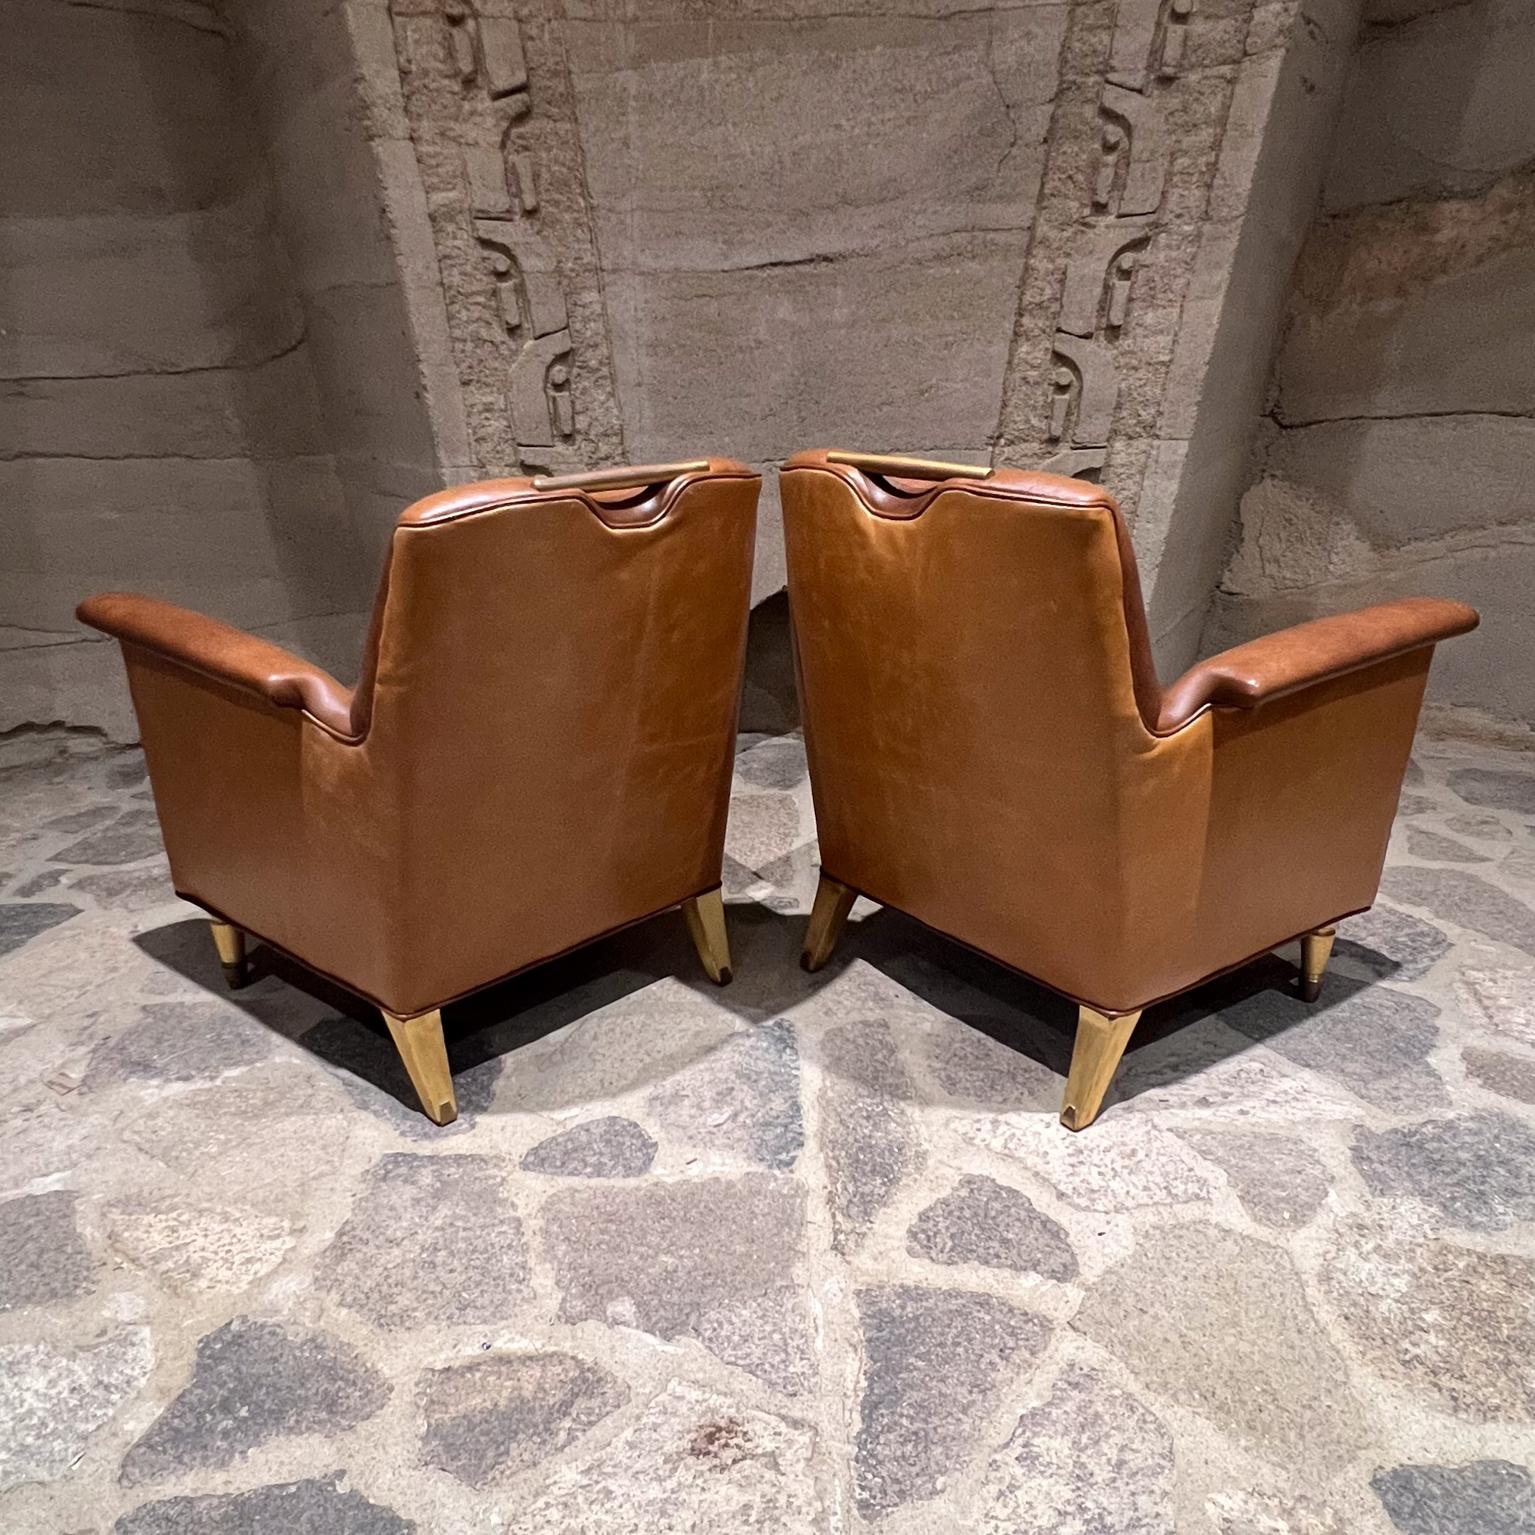 1950s Octavio Vidales Chairs Leather and Mahogany Mexico City For Sale 2